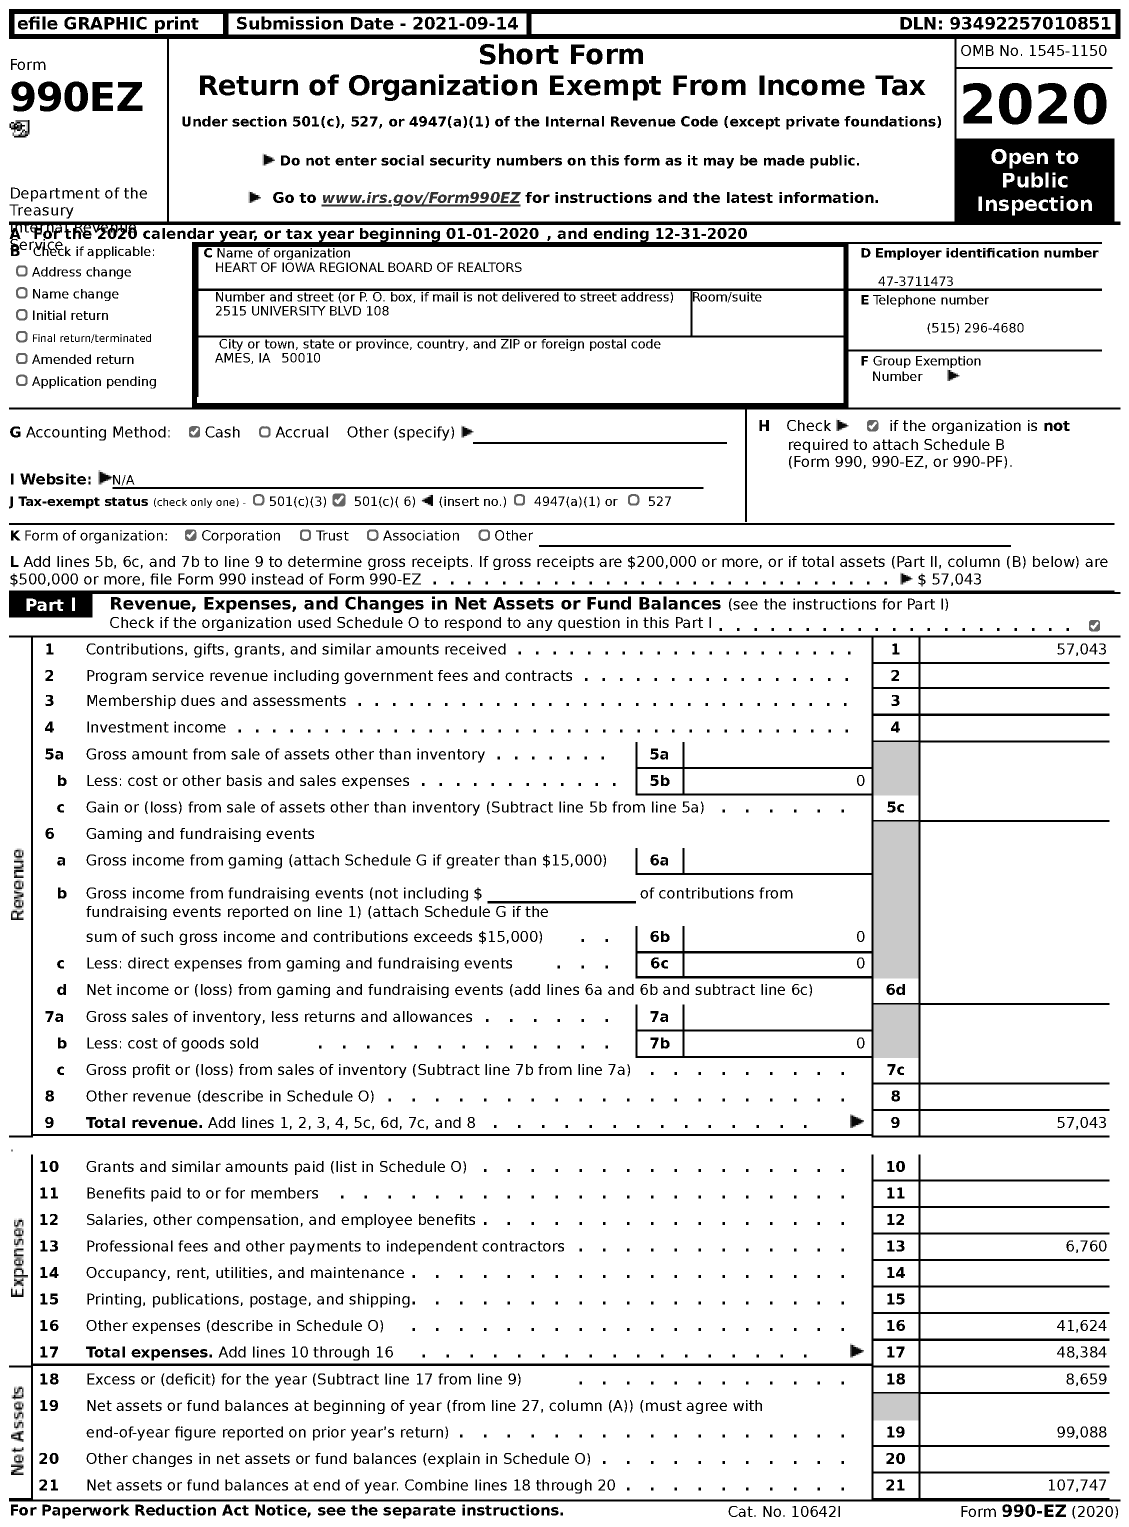 Image of first page of 2020 Form 990EZ for Heart of Iowa Regional Board of Realtors